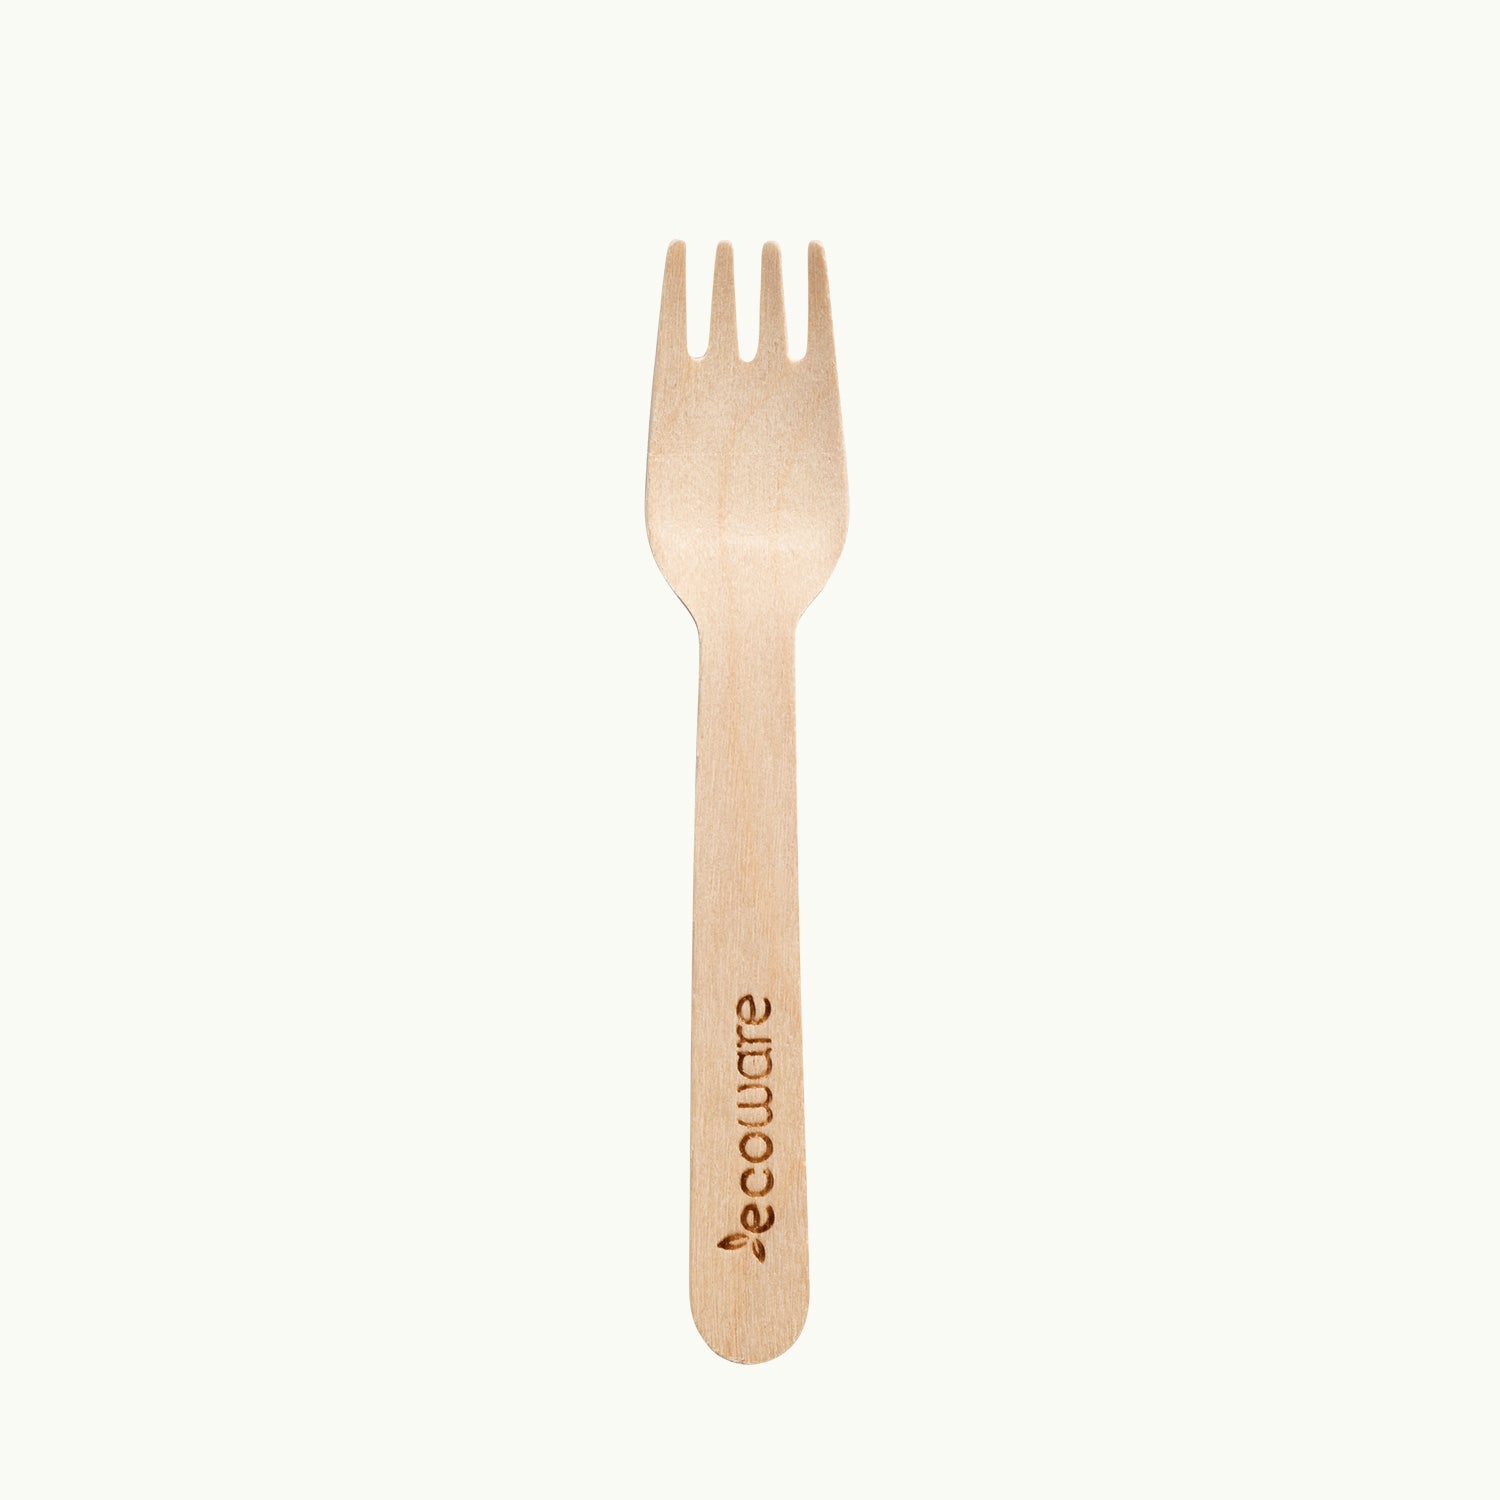 Certified compostable wooden cutlery fork.